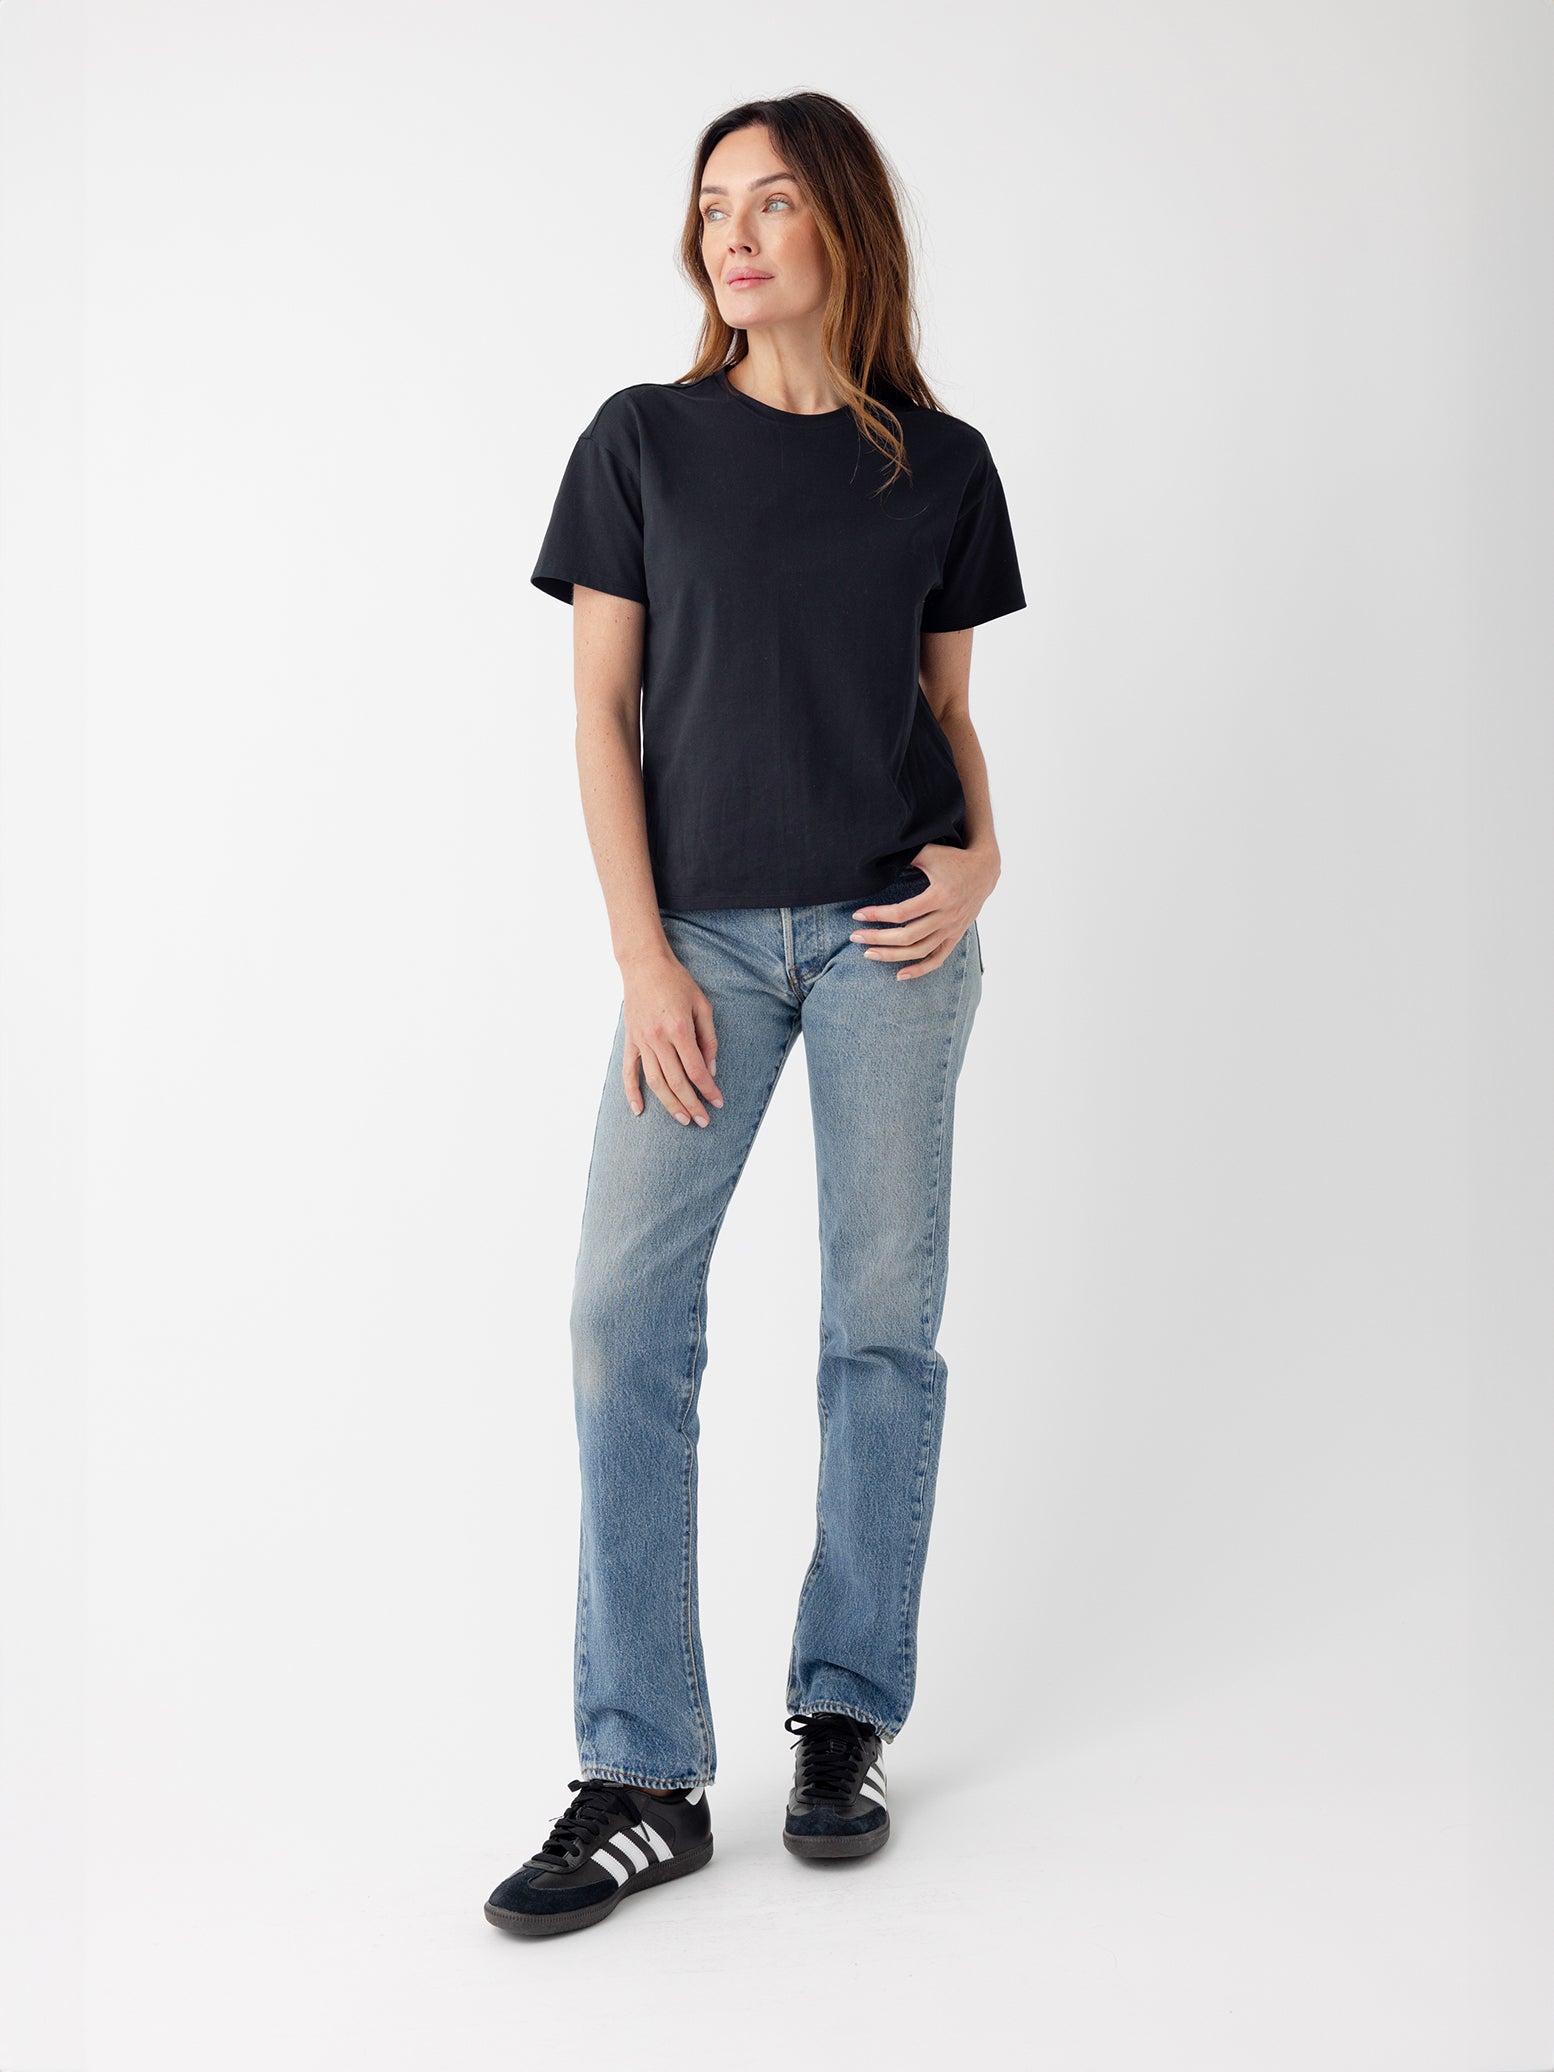 Woman wearing black tee and jeans with white background 